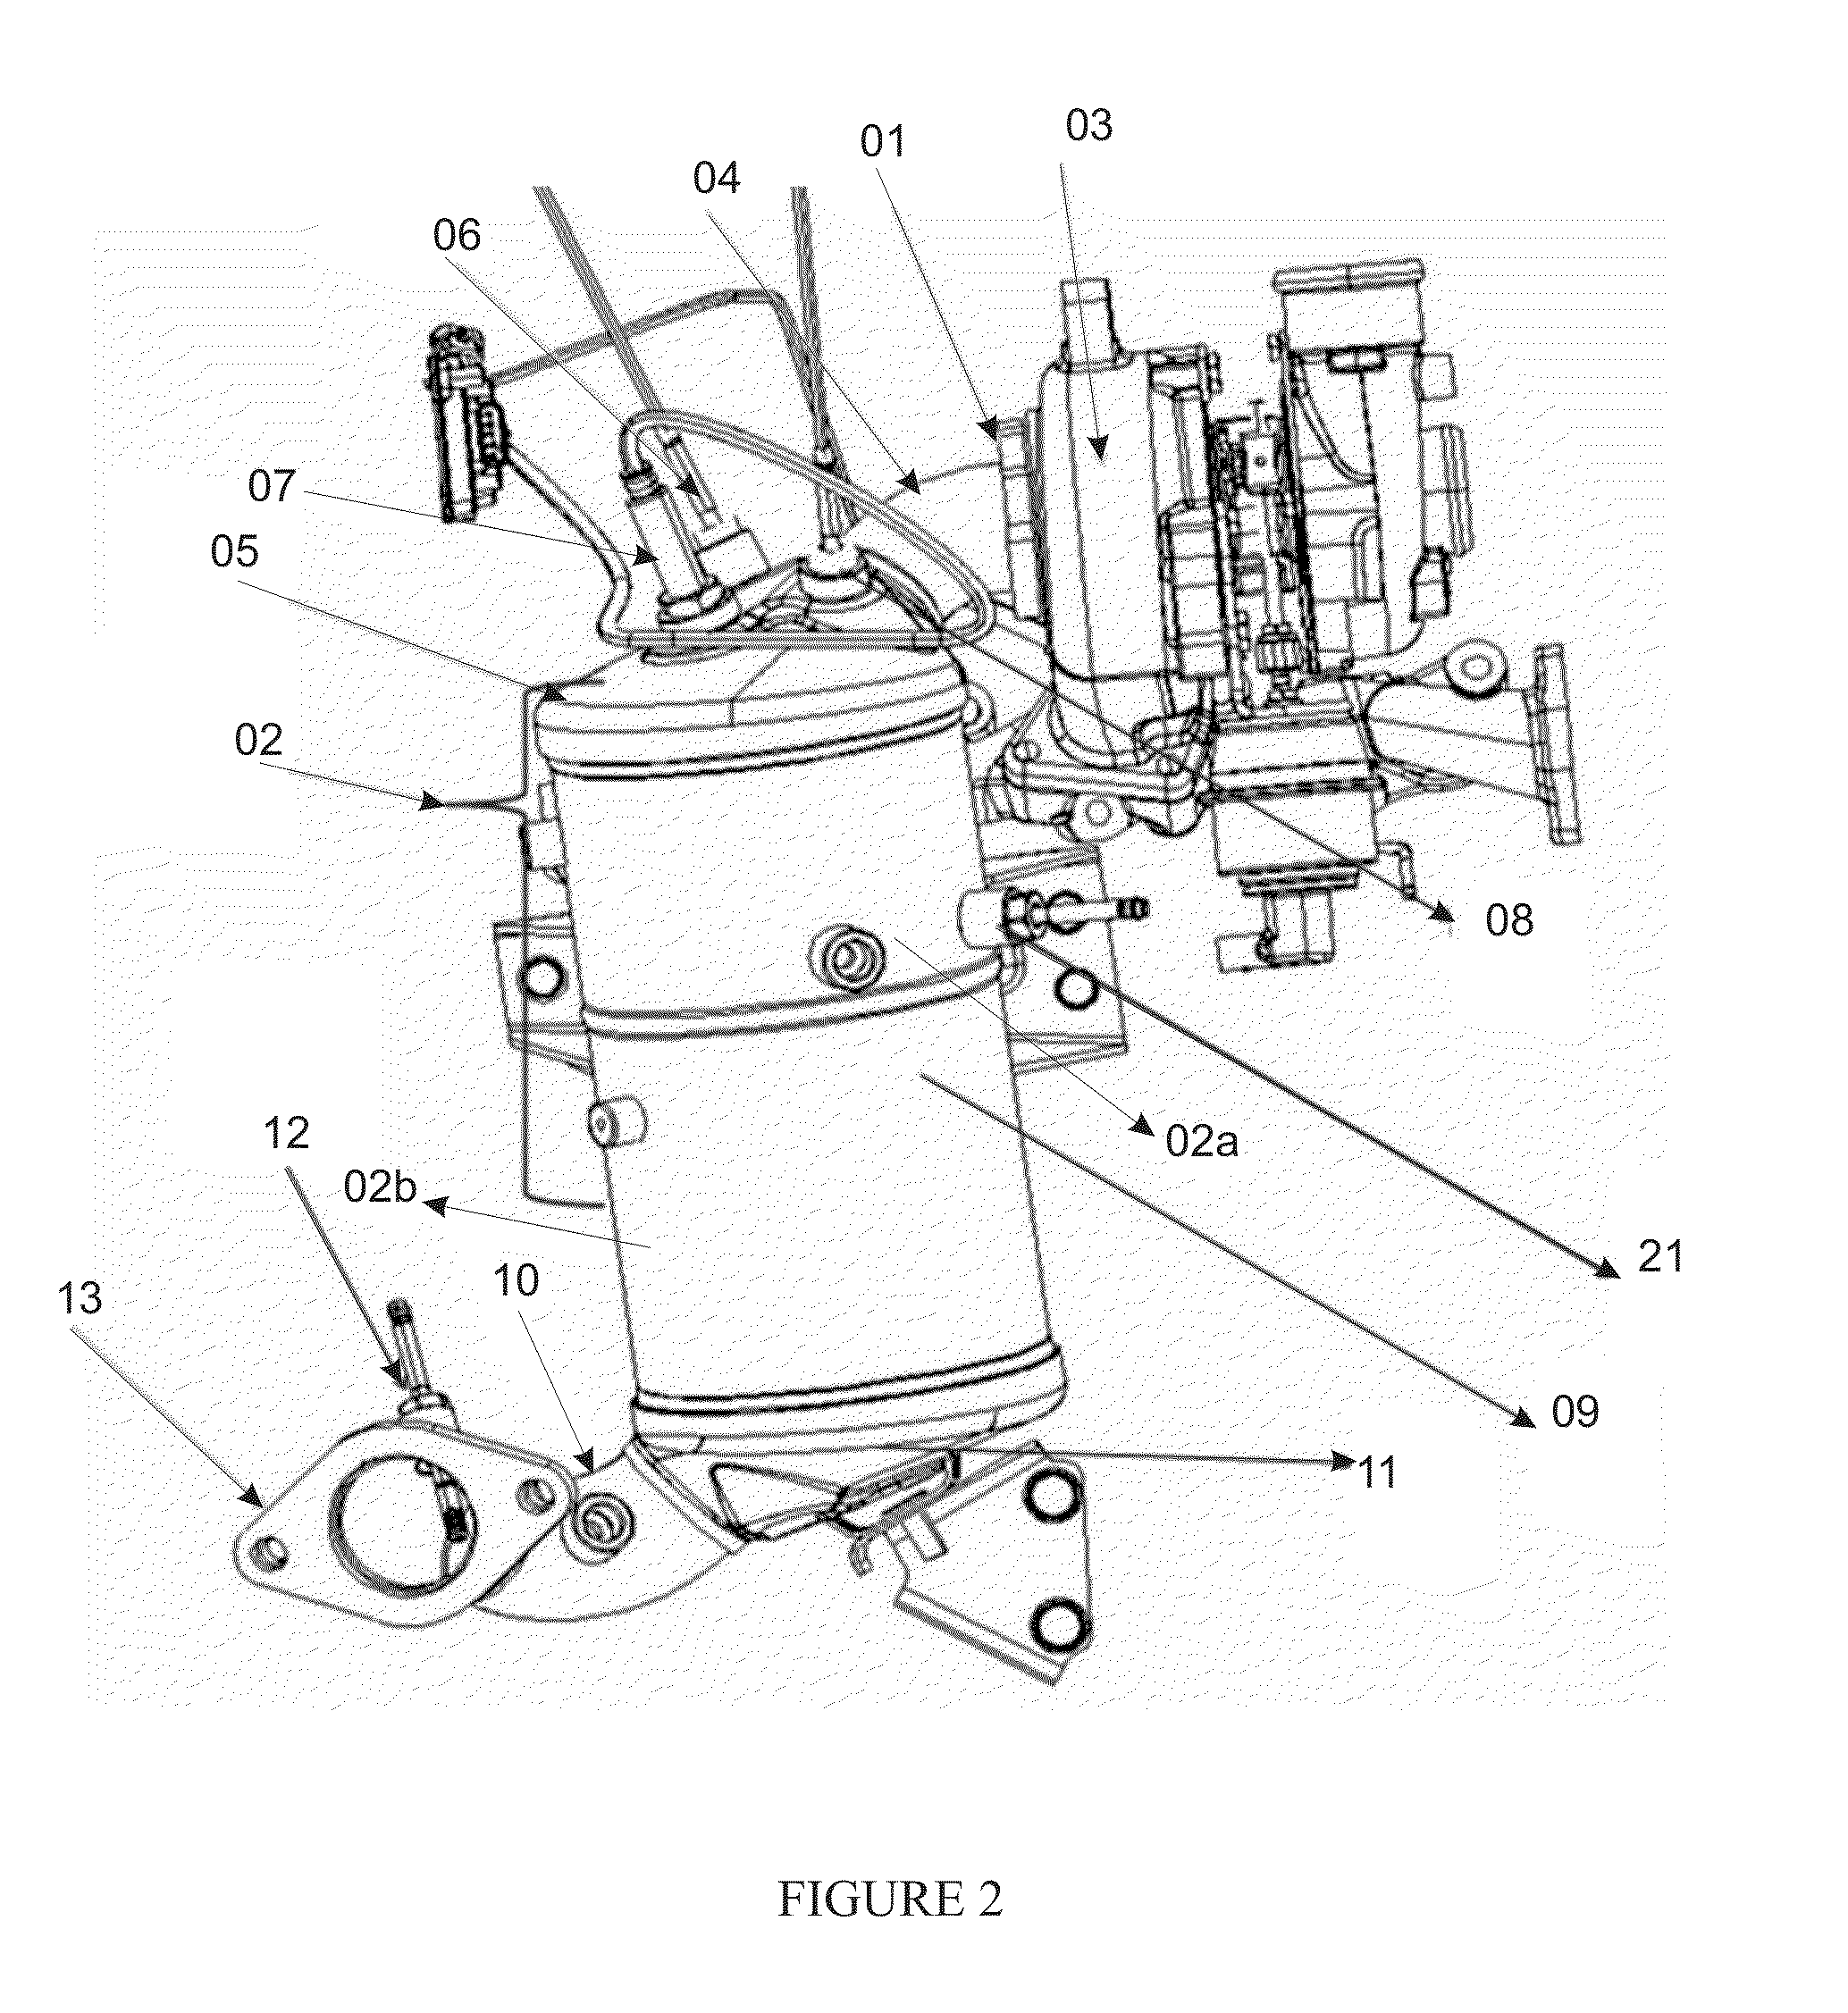 Integrated exhaust gas after-treatment system for diesel fuel engines